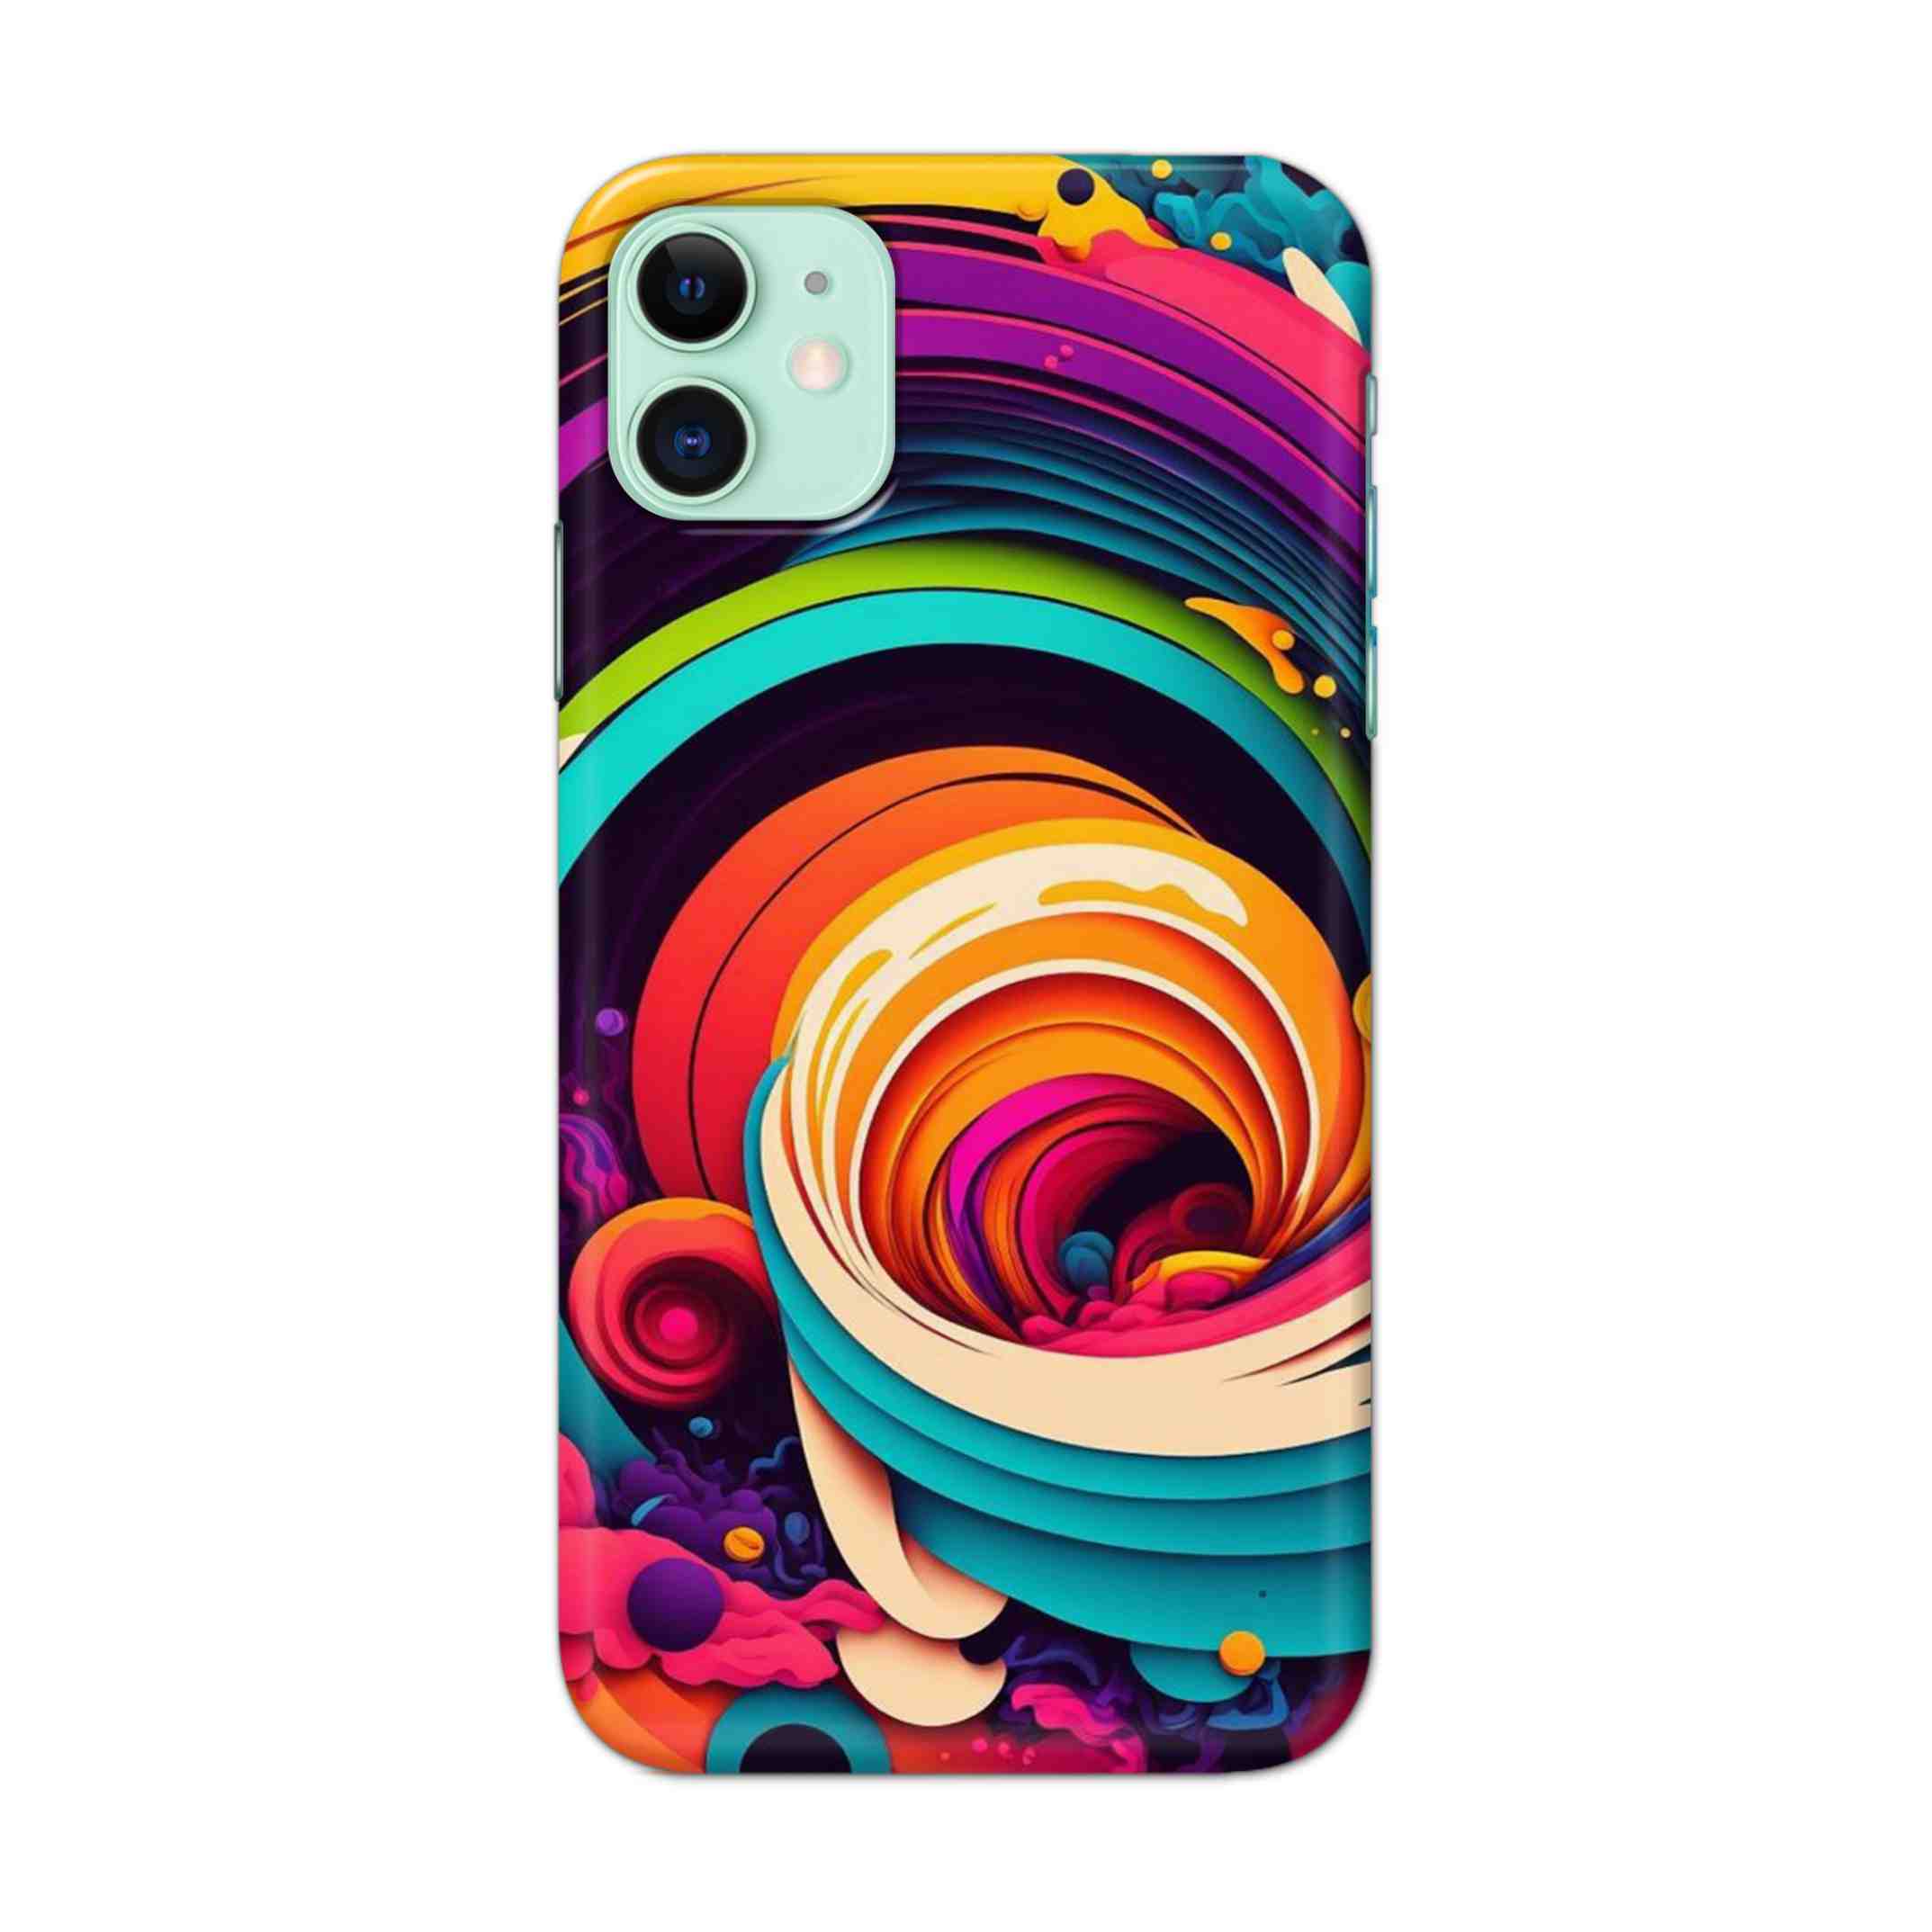 Buy Colour Circle Hard Back Mobile Phone Case/Cover For iPhone 11 Online